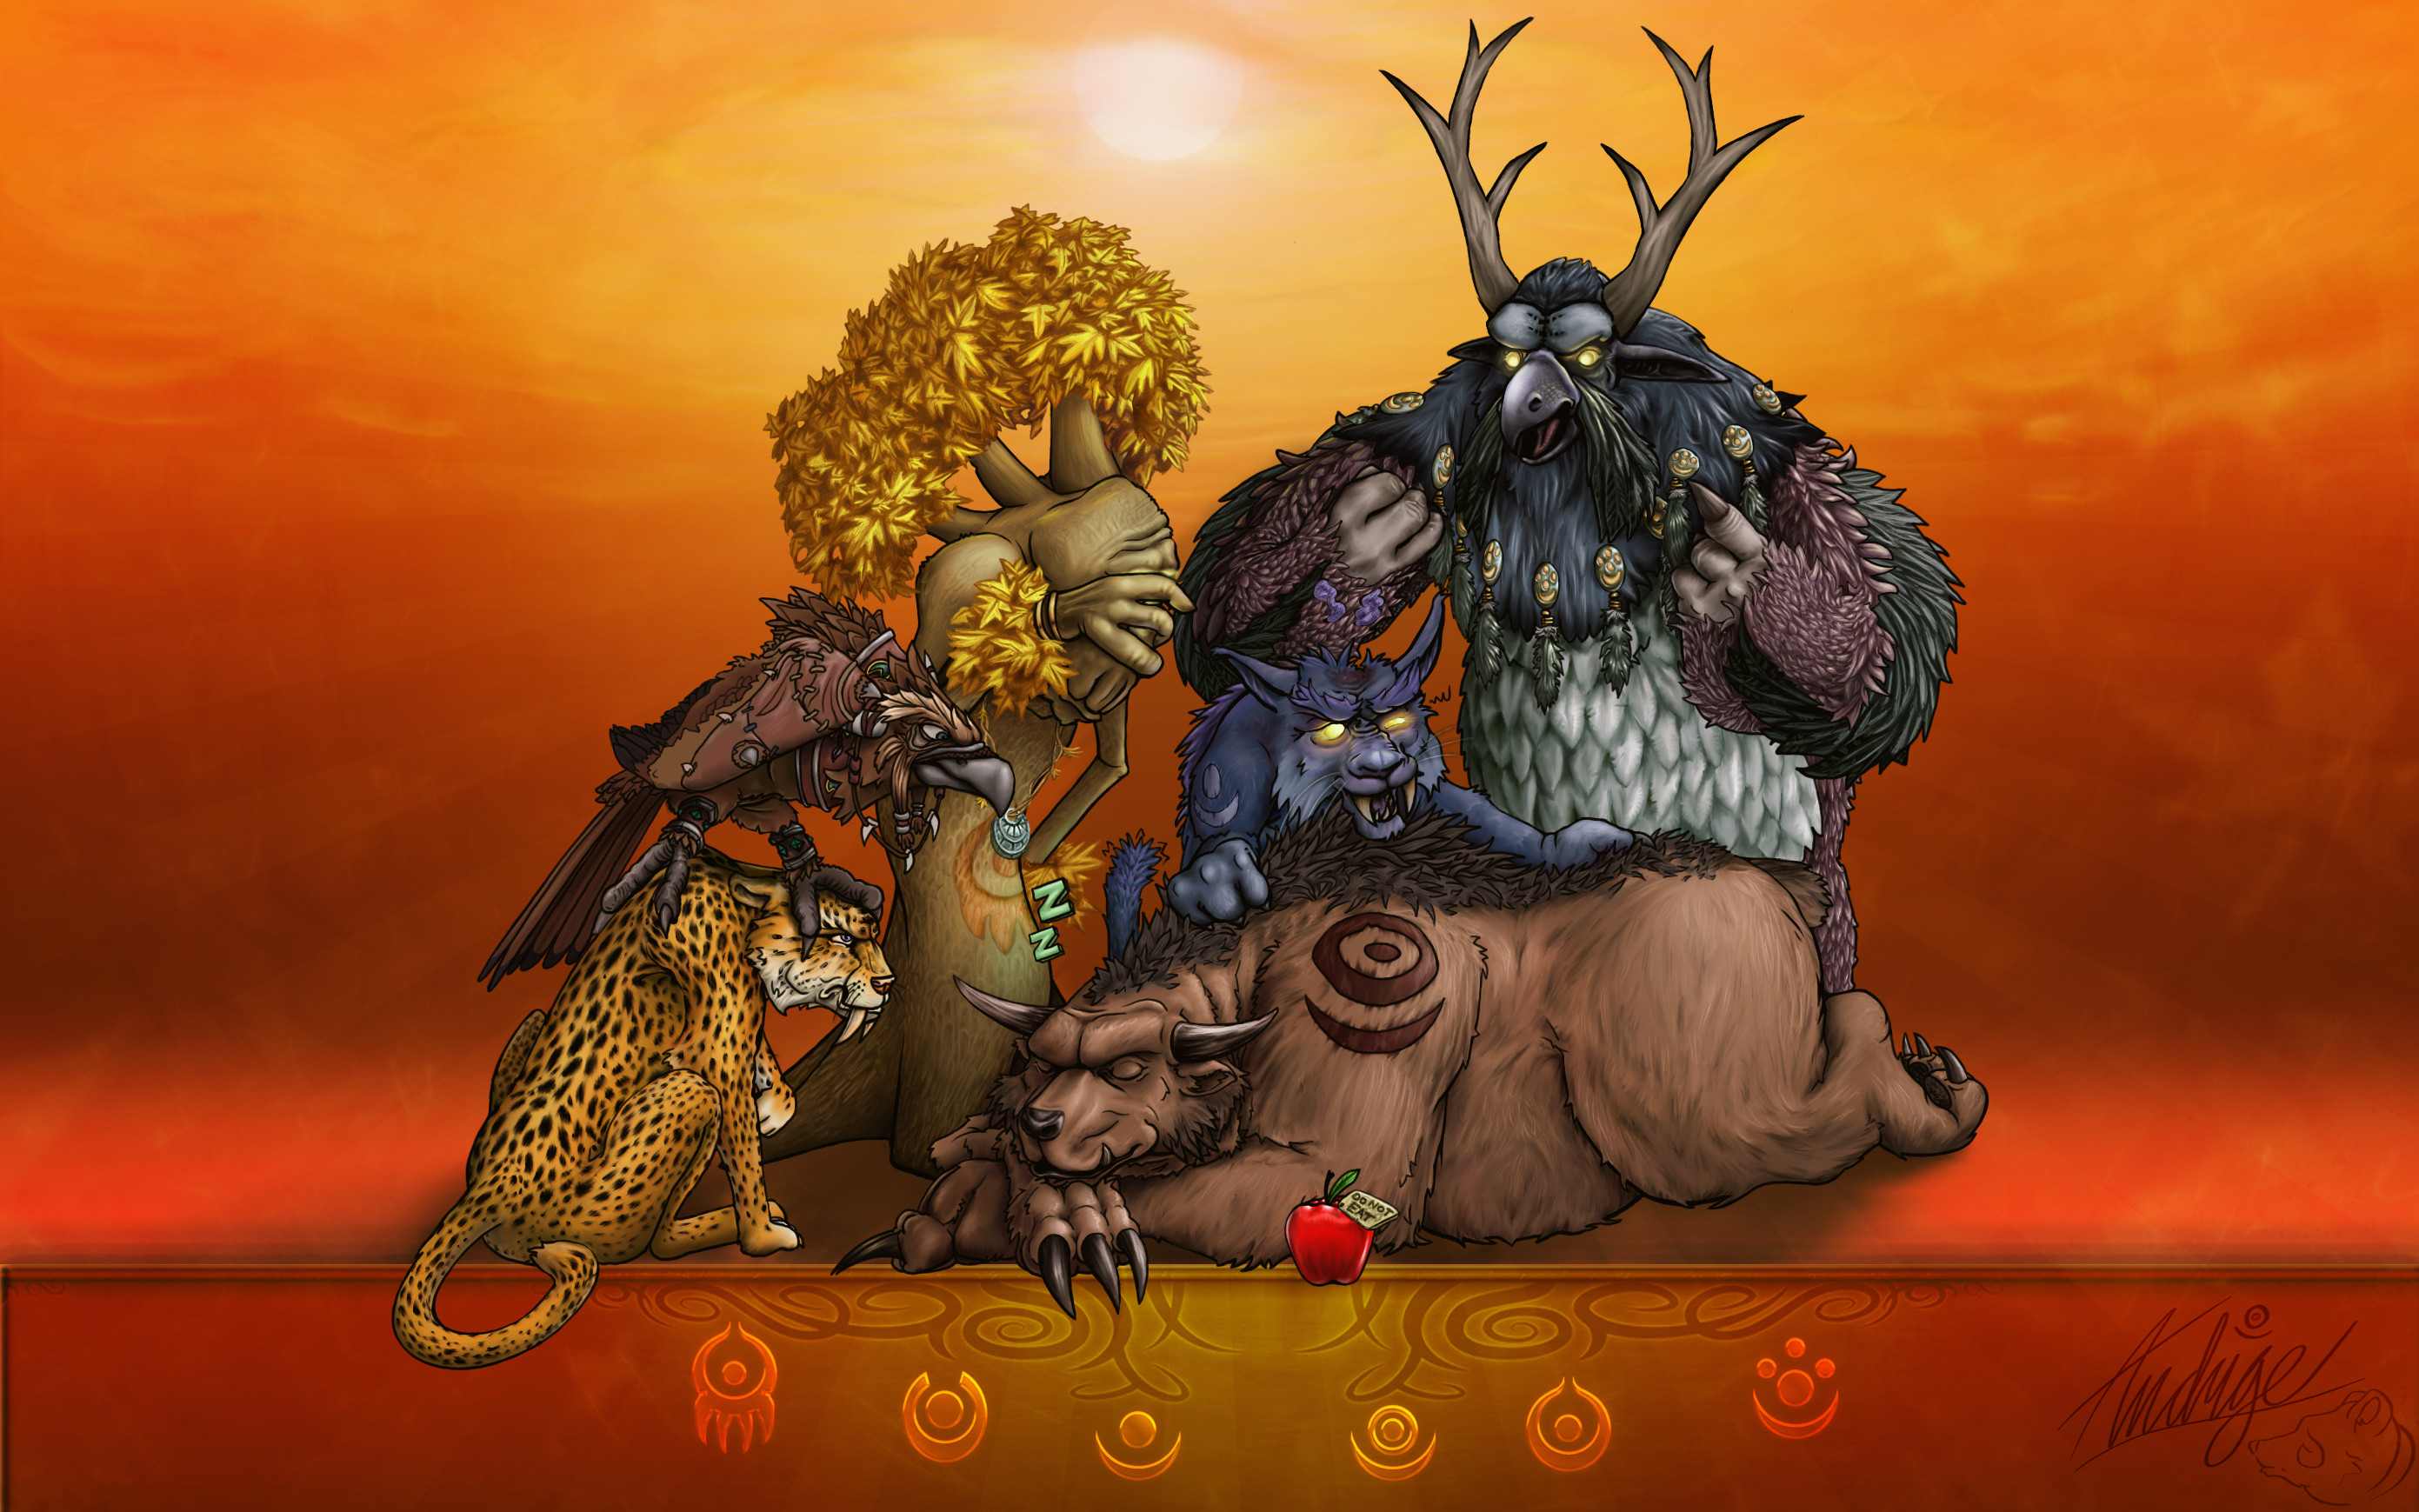 2782x1739 Druids of Azeroth by Triggerman Druids of Azeroth by Triggerman